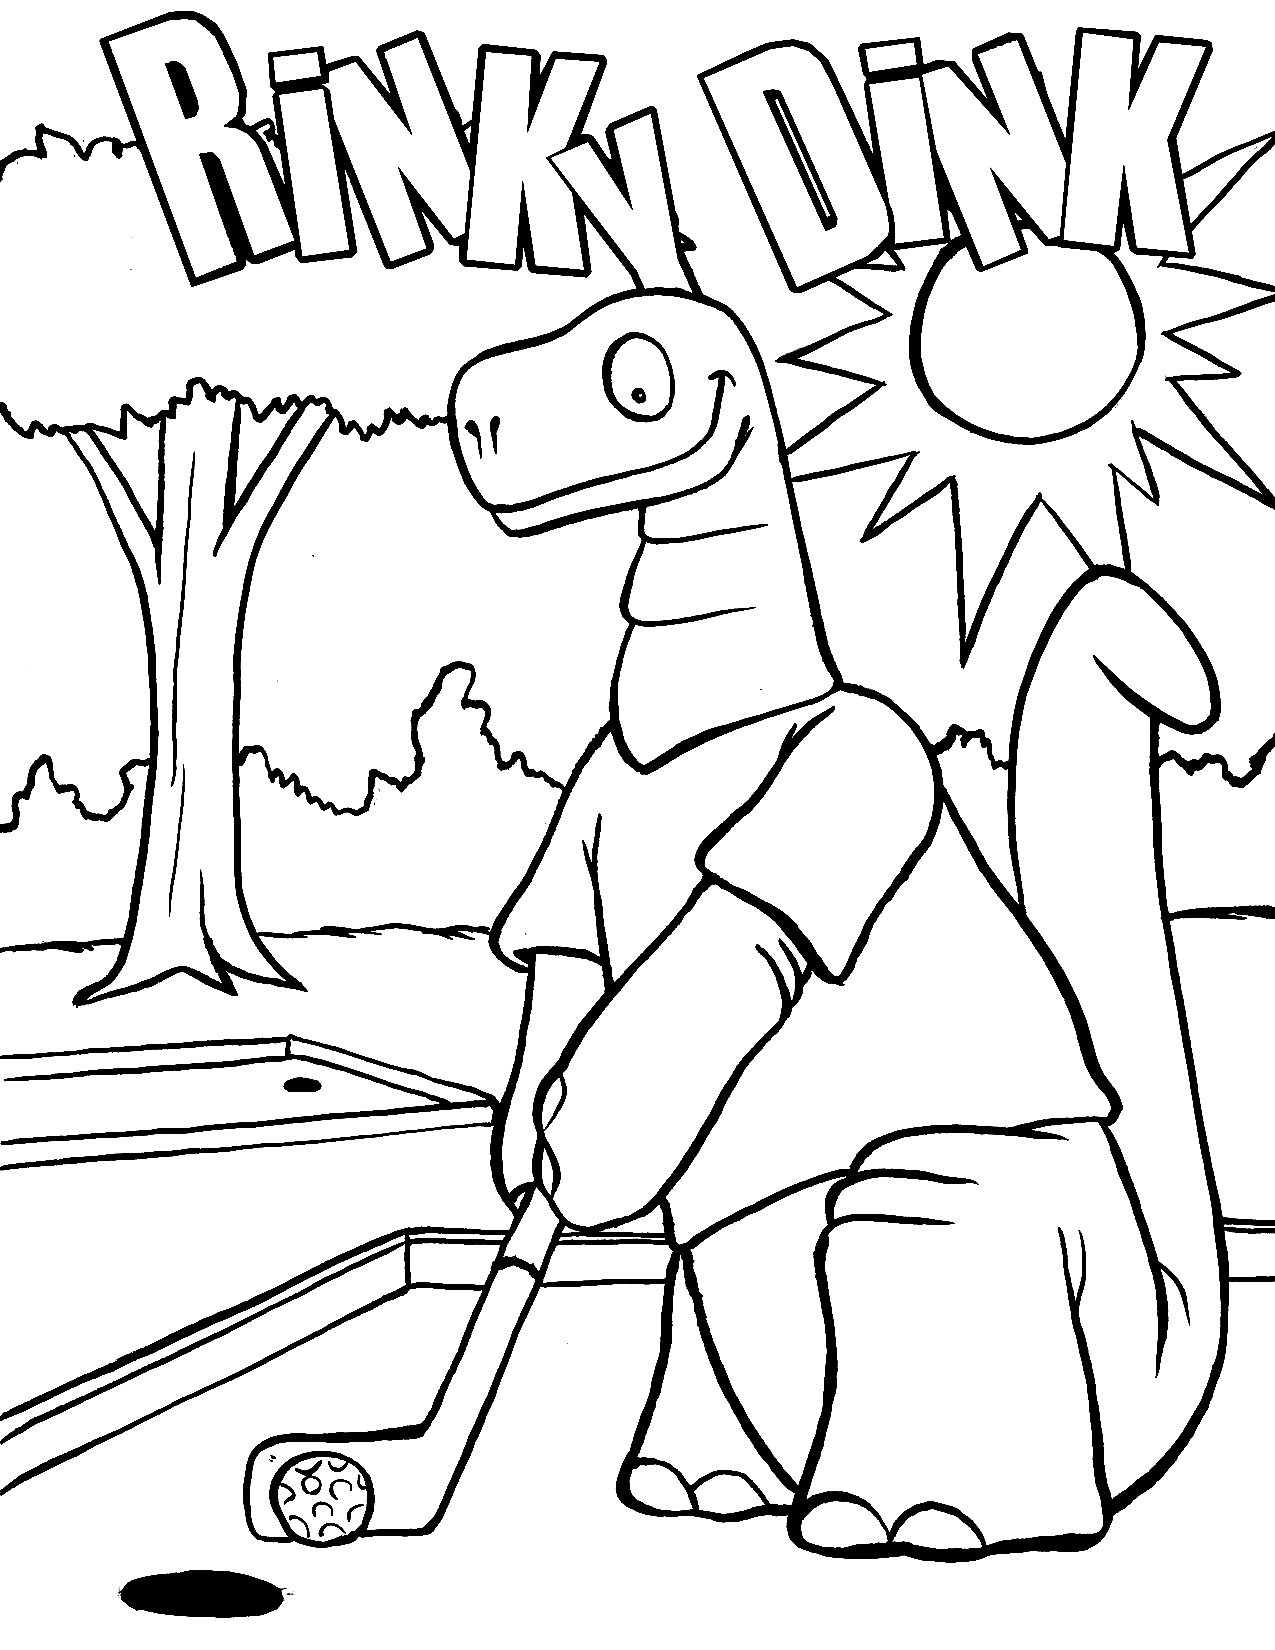 Dinosaur Playing Golf Coloring Page